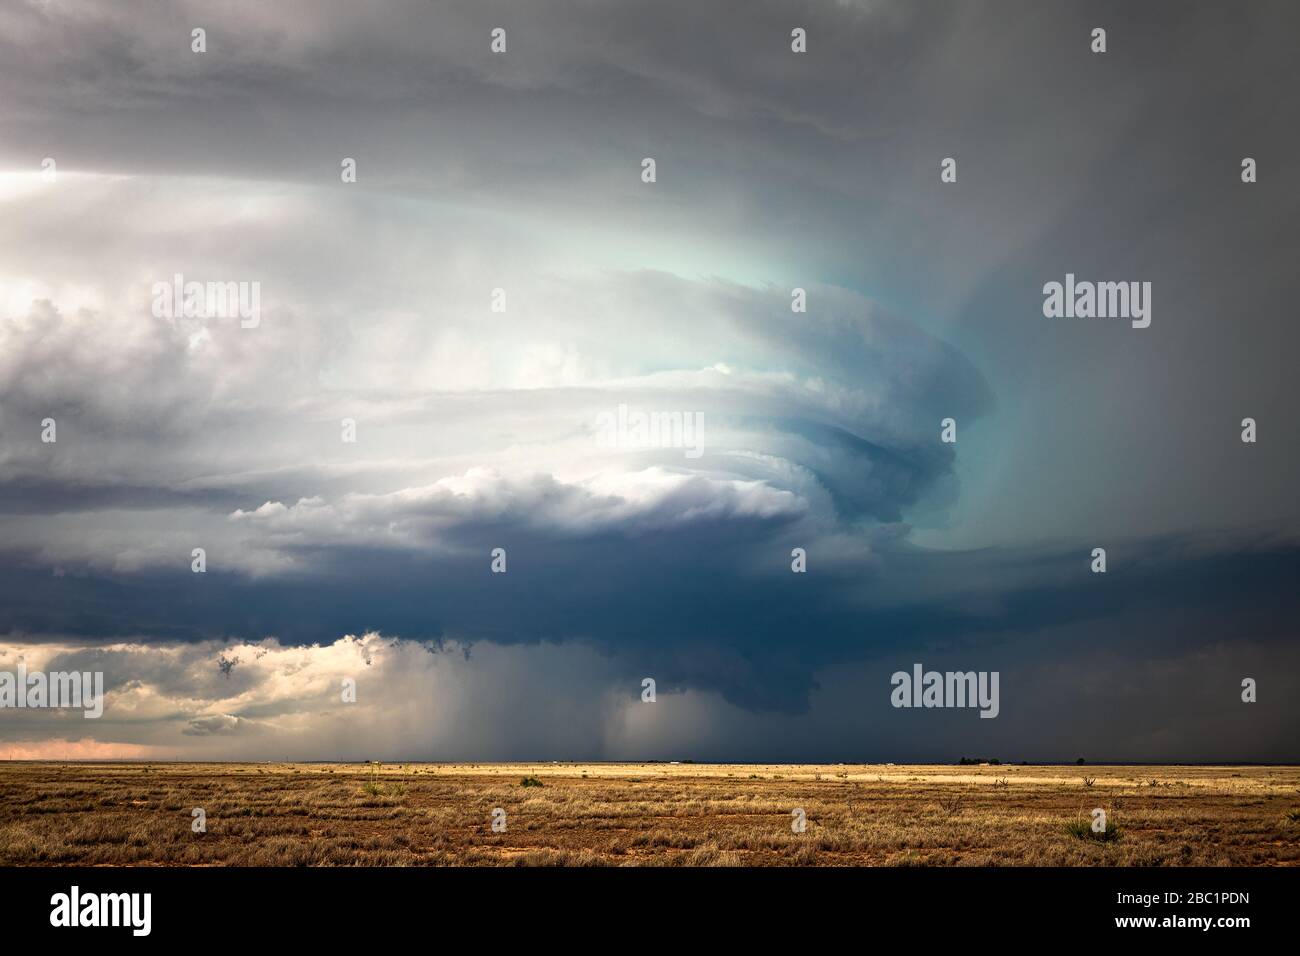 Dark clouds and dramatic sky as a supercell thunderstorm spins in a field during a severe weather event near Artesia, New Mexico Stock Photo